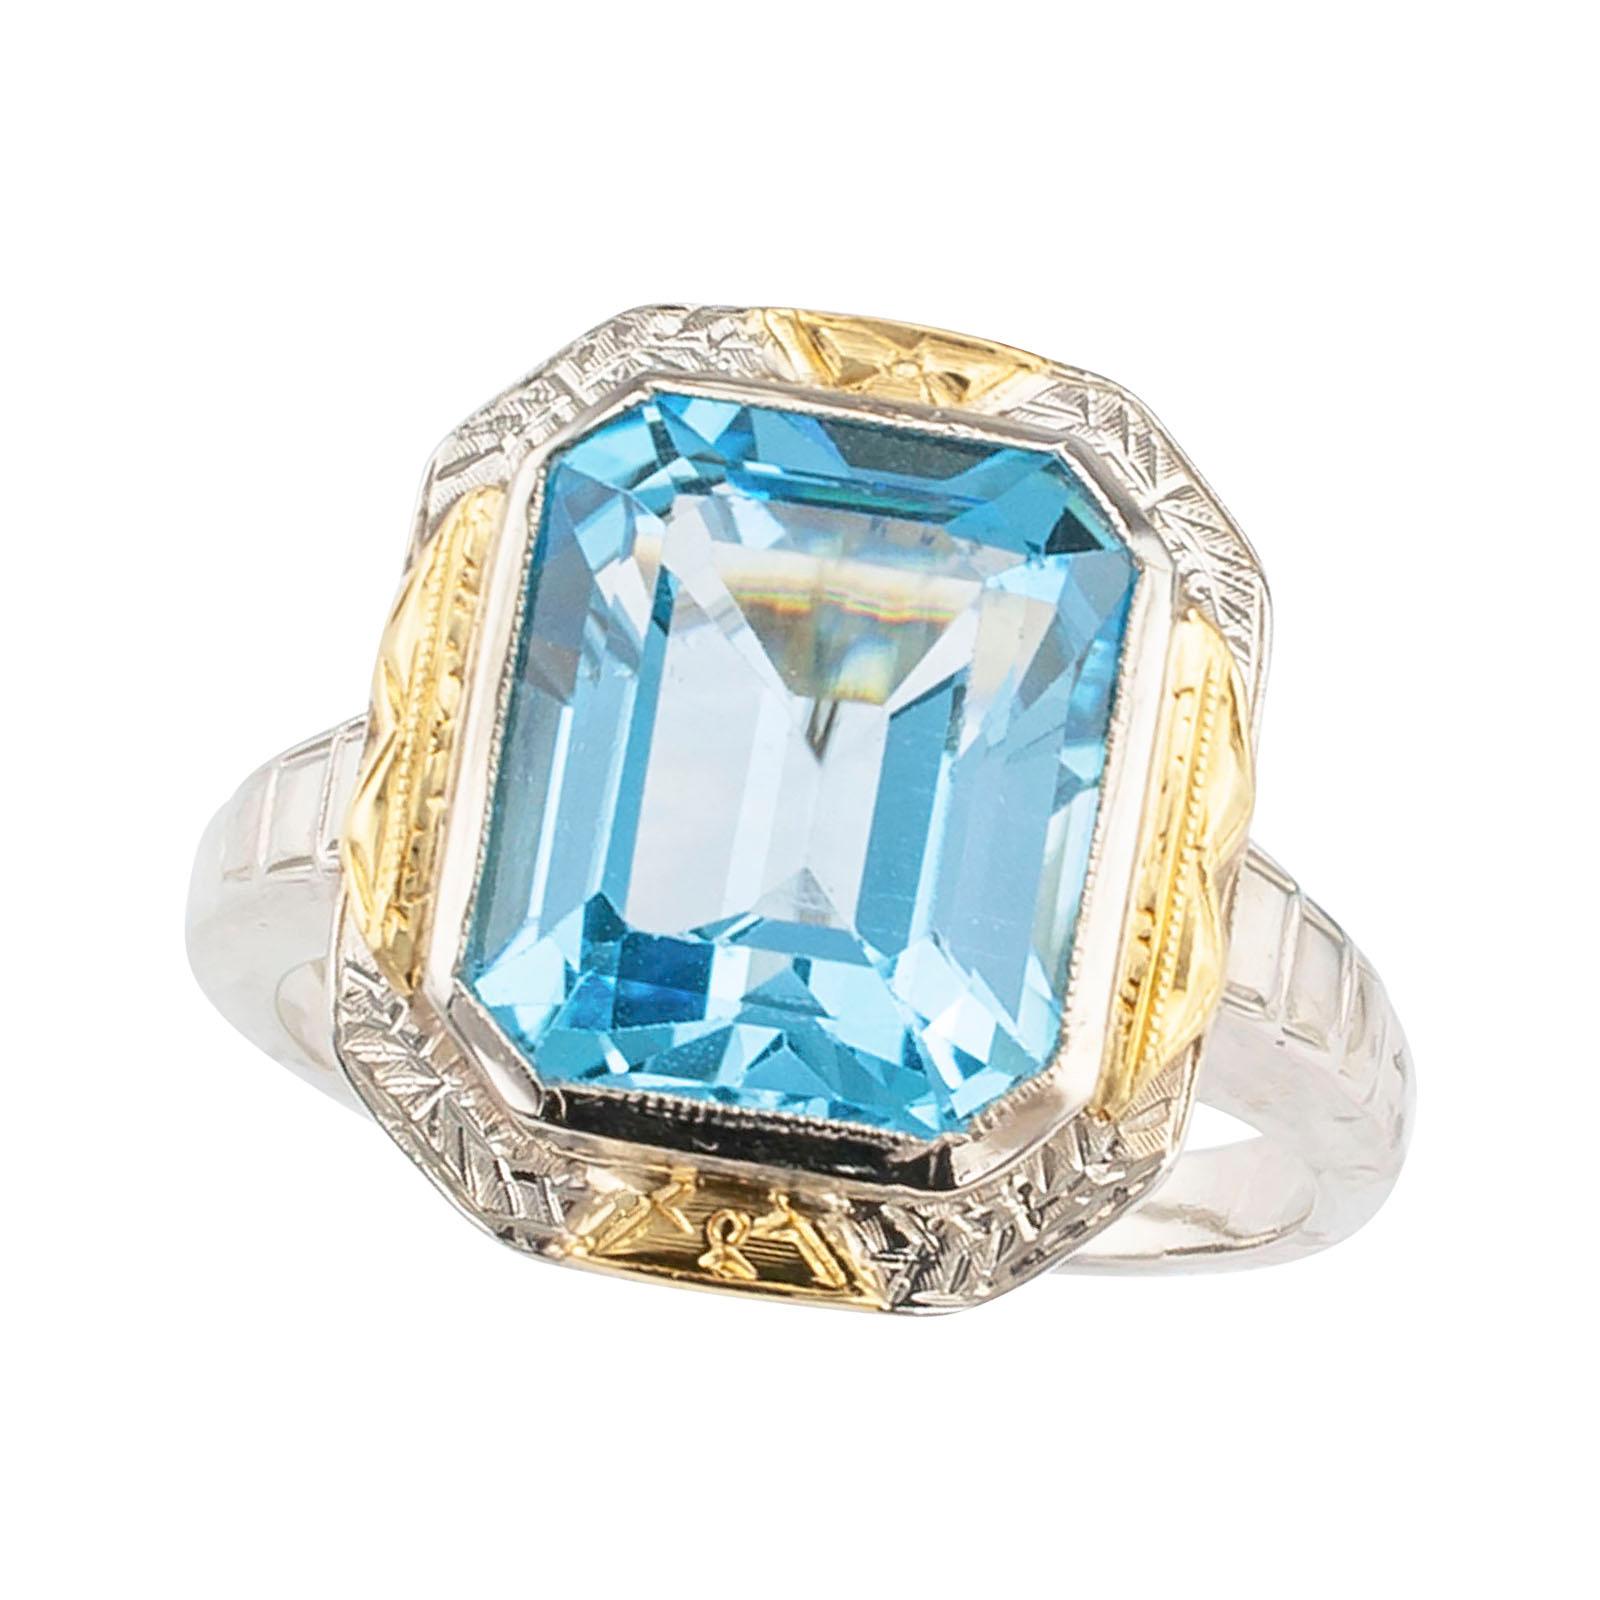 Art Deco blue topaz and two-tone gold ring circa 1930.

DETAILS:
GEMSTONE: one emerald-cut blue topaz.

METAL: white and yellow 14-karat gold.

RING SIZE: approximately 5 ¾, can be resized.

MEASUREMENTS: approximately 9/16” (14 mm) wide across the